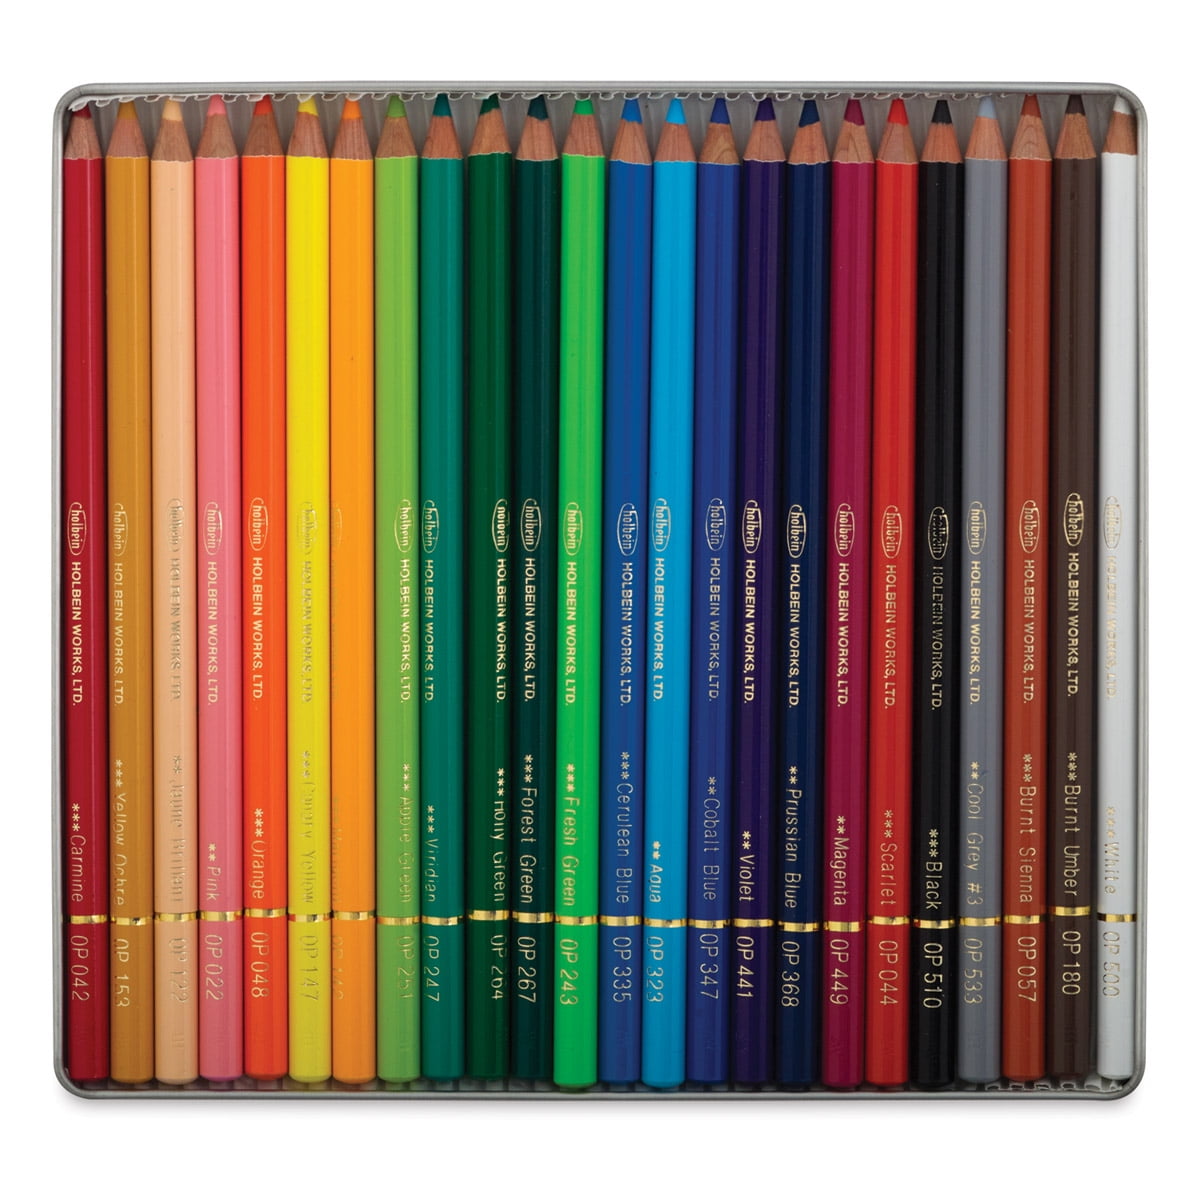 1Pcs Inkless Eternal Colored Pencils for Kids Adults Erasable